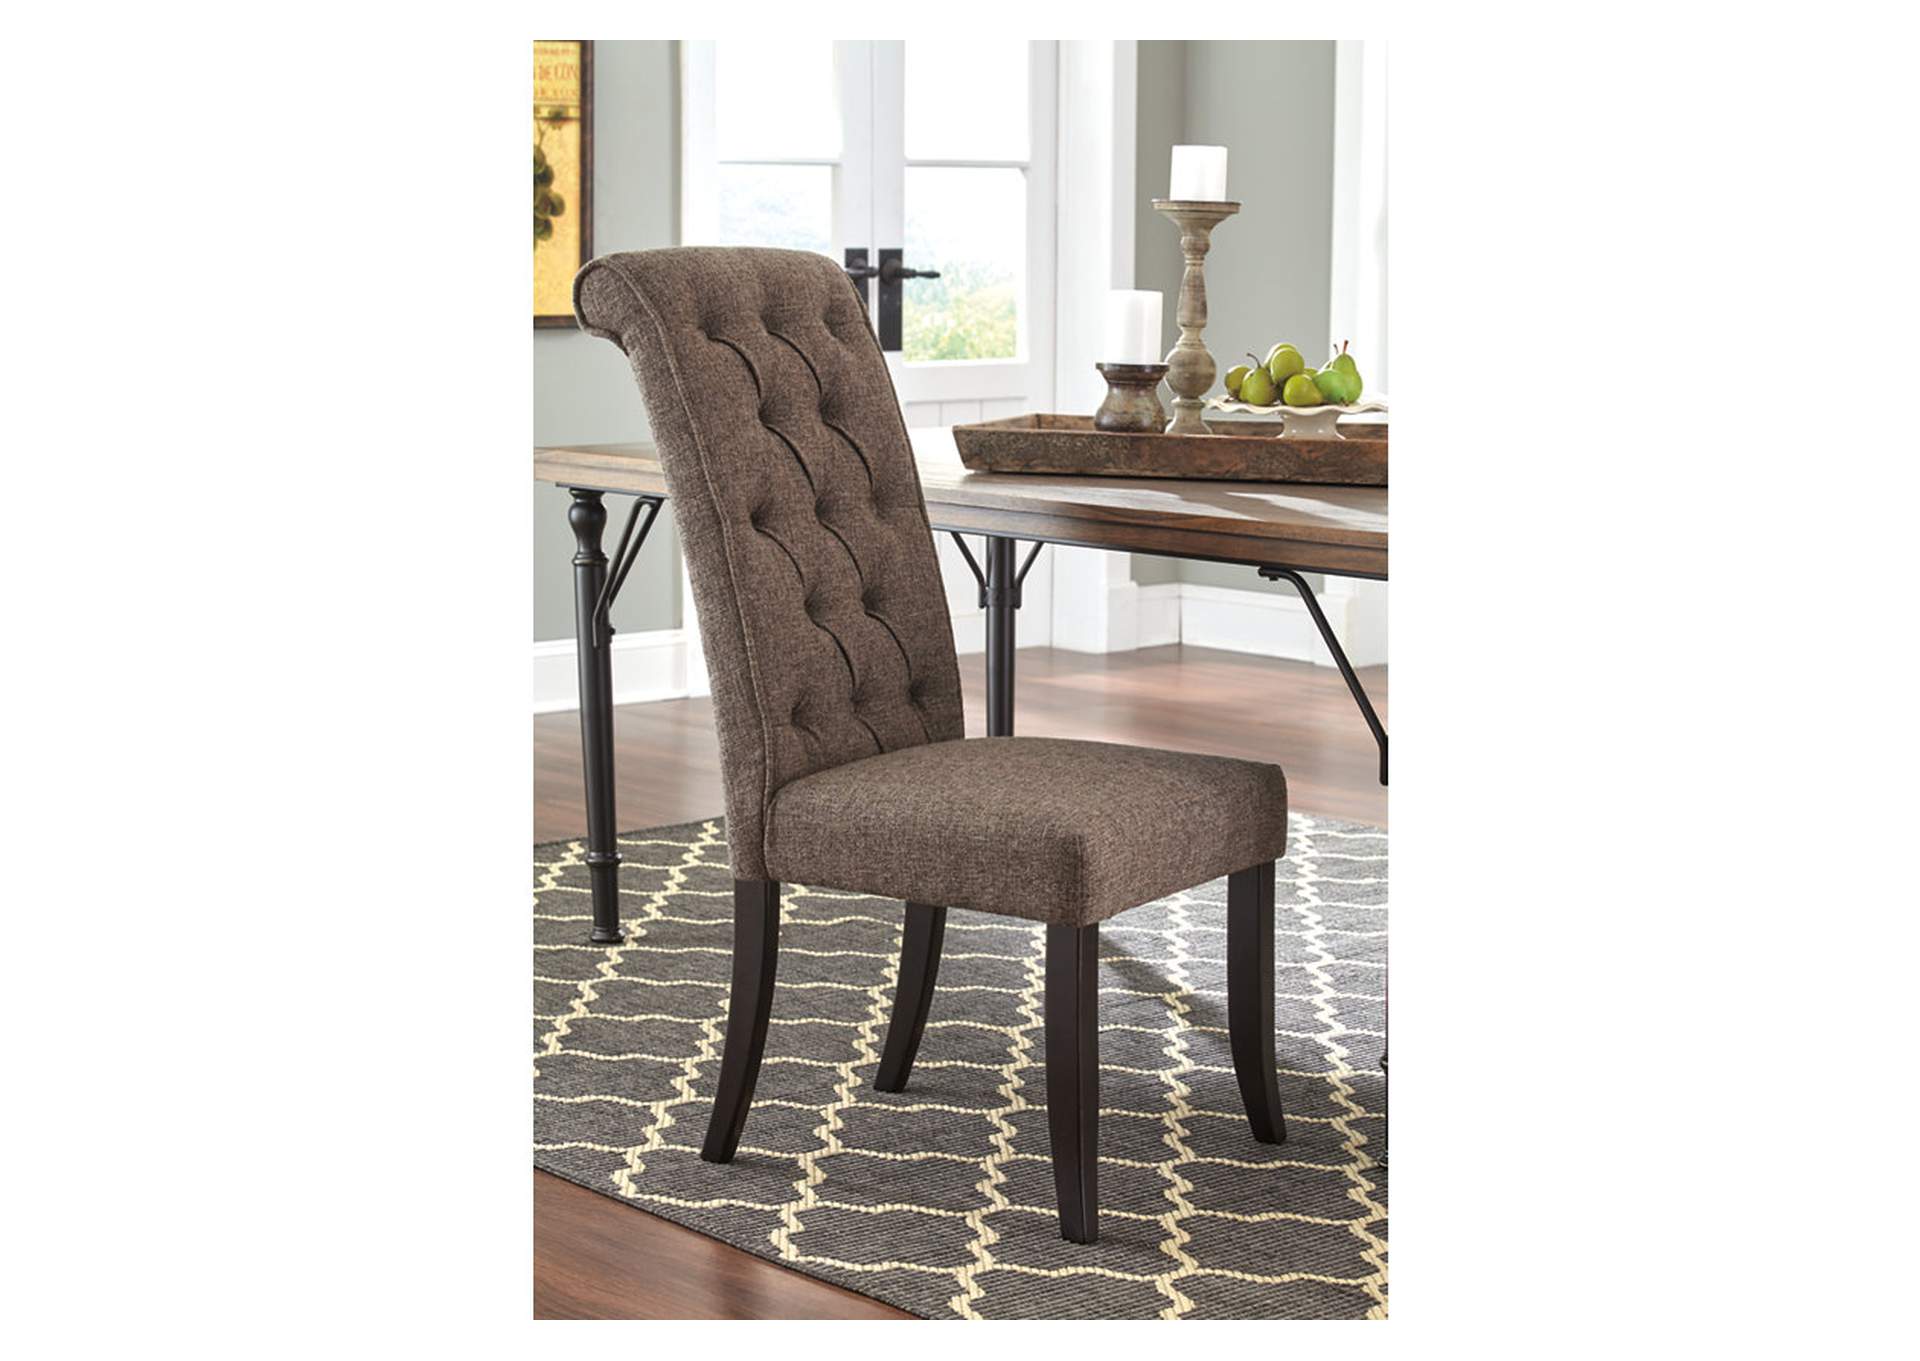 Tripton 2-Piece Dining Room Chair,Signature Design By Ashley